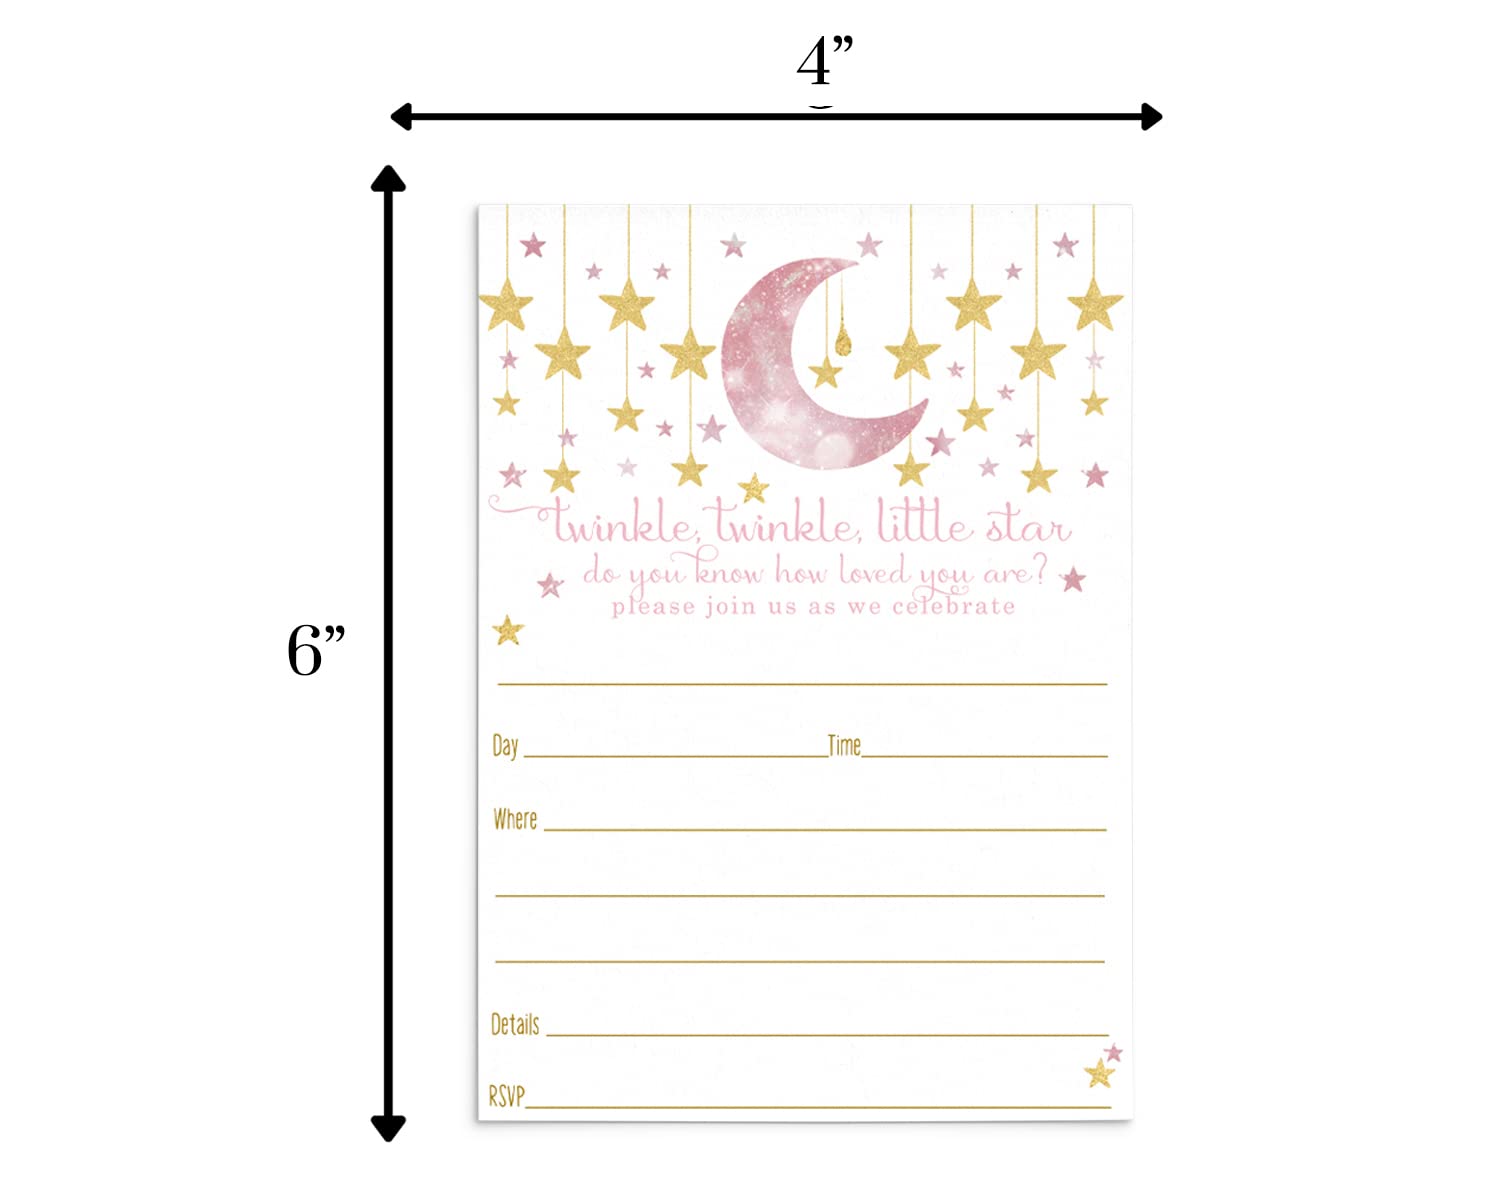 Paper Clever Party Twinkle Little Star Invitations and Envelopes (15 Pack) Blank Invites for Girls Baby Shower, Reveal, Sprinkle – Celestial Theme Design Pink and Gold - Printed 4x6 Size Card Set